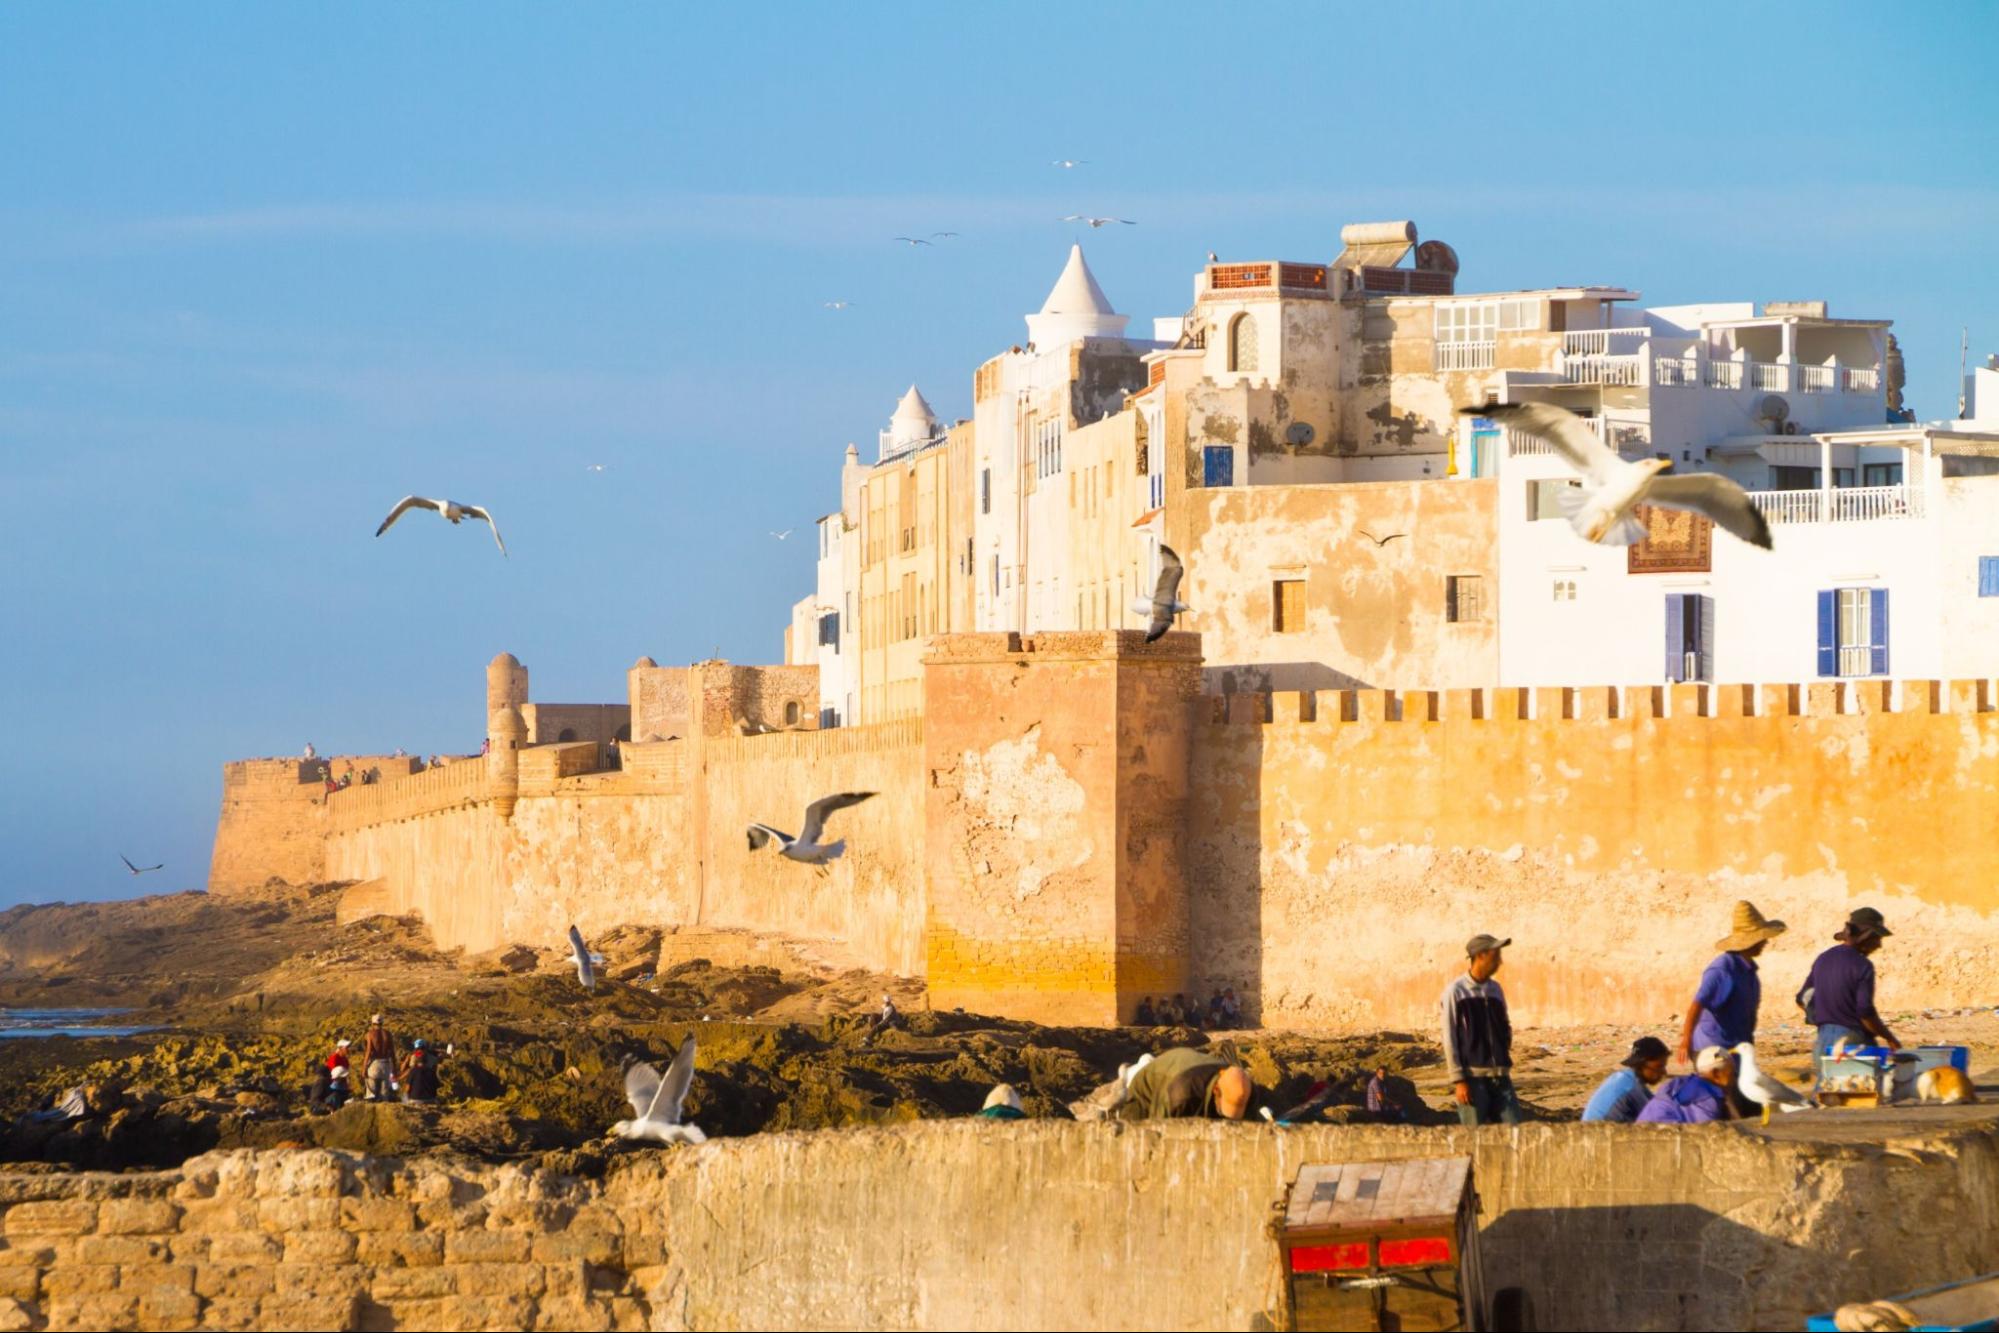 Essaouira is a city in the western Moroccan economic region of Marrakech Tensift Al Haouz, on the Atlantic coast. It has also been known by its Portuguese name of Mogador. Morocco, 